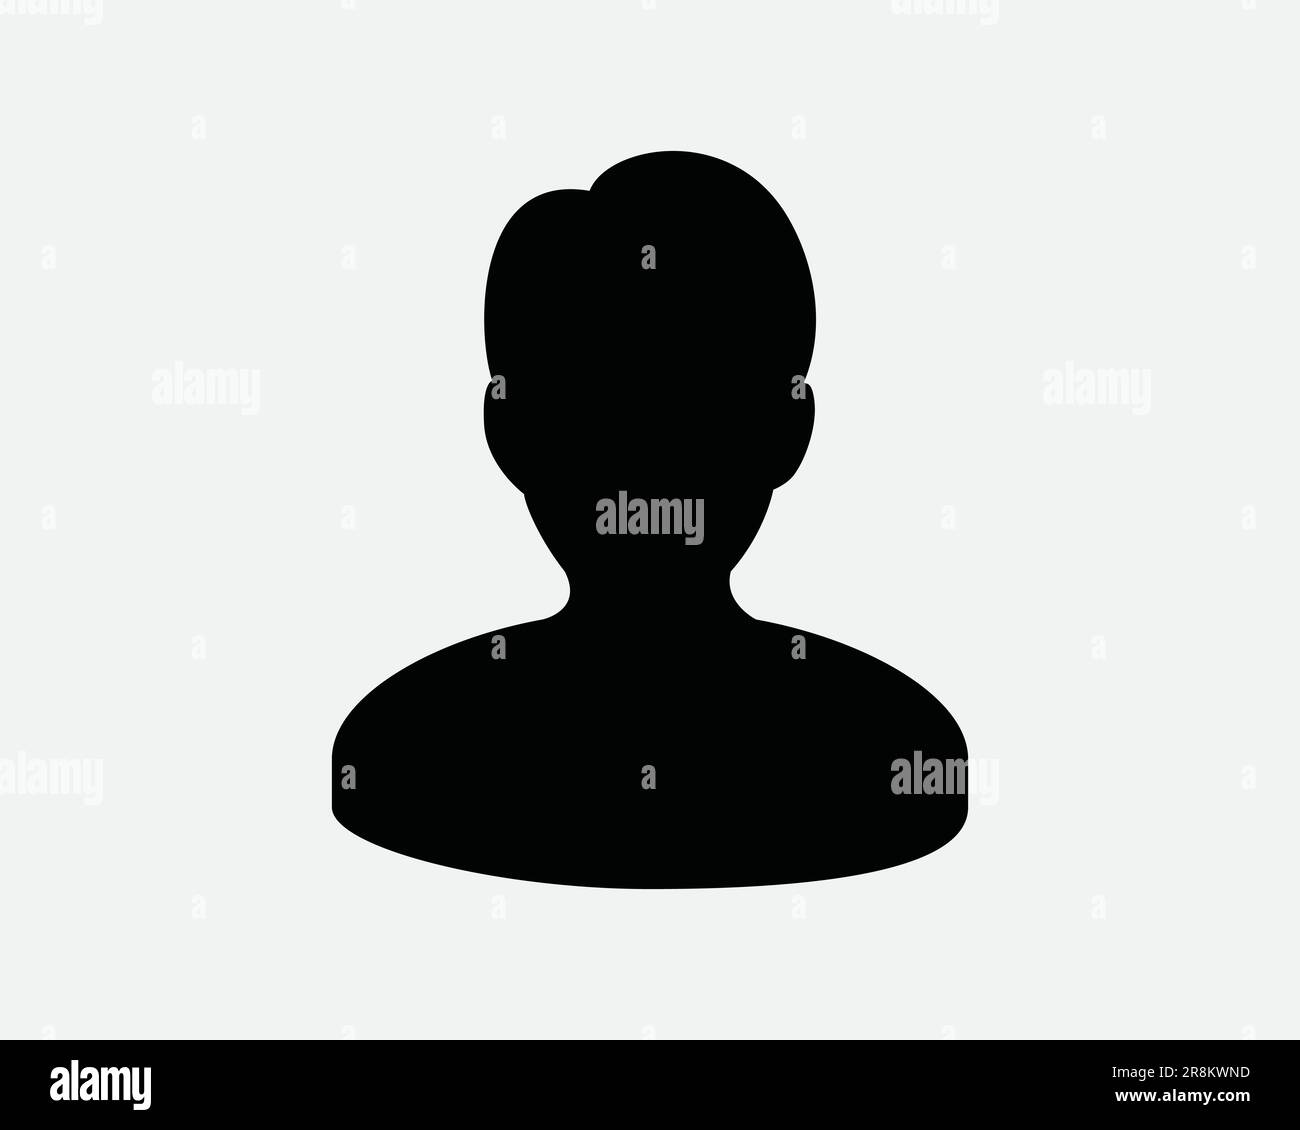 Man Head Silhouette Icon. Person User Social Account Profile Character Avatar Black White Sign Symbol Illustration Artwork Graphic Clipart EPS Vector Stock Vector